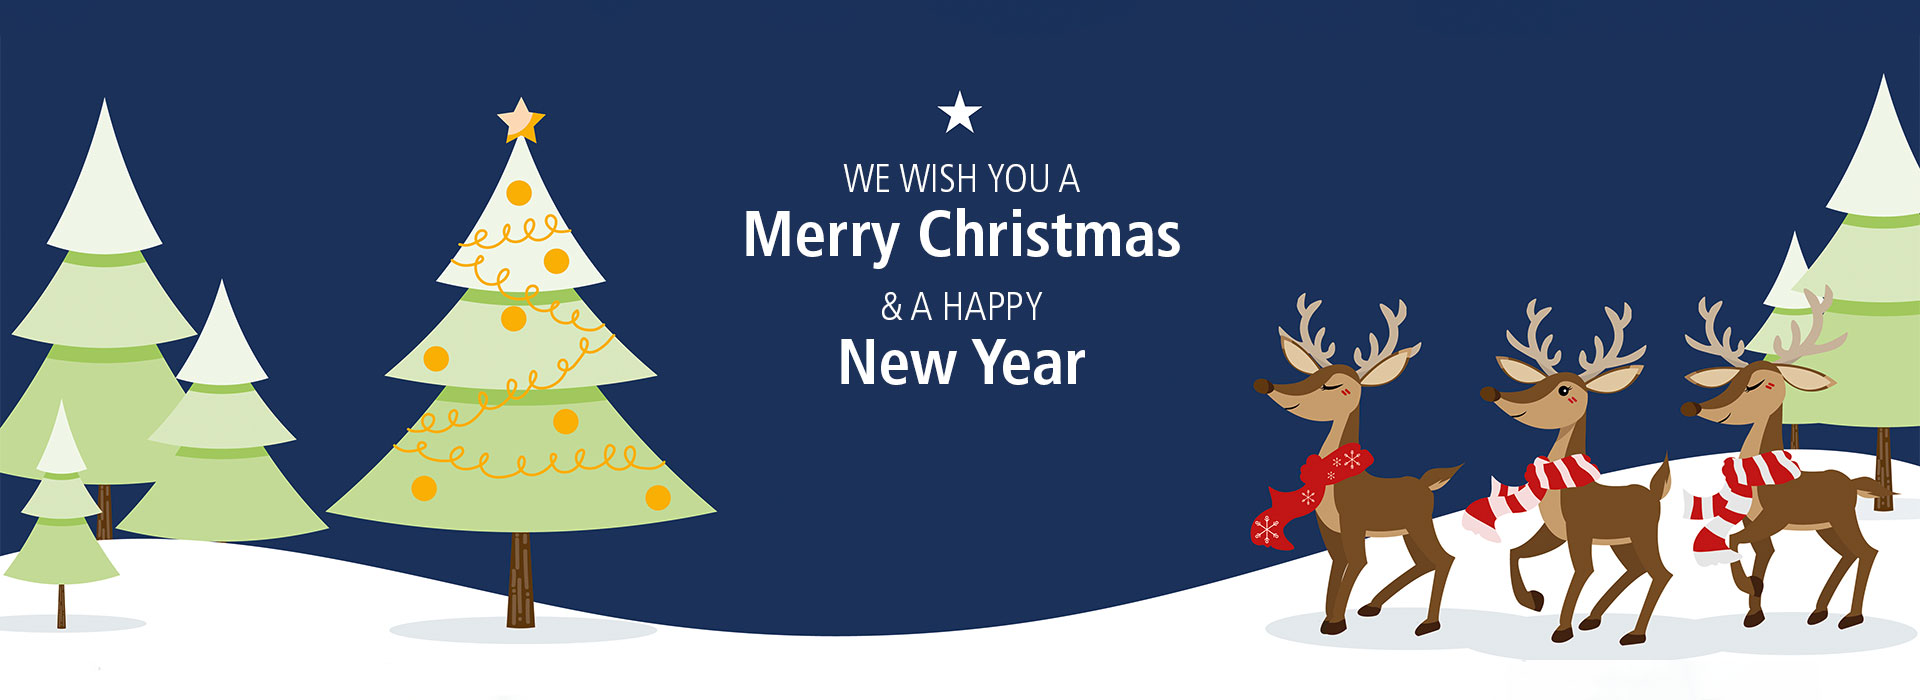 MAICO wishes merry christmas and a happy new year